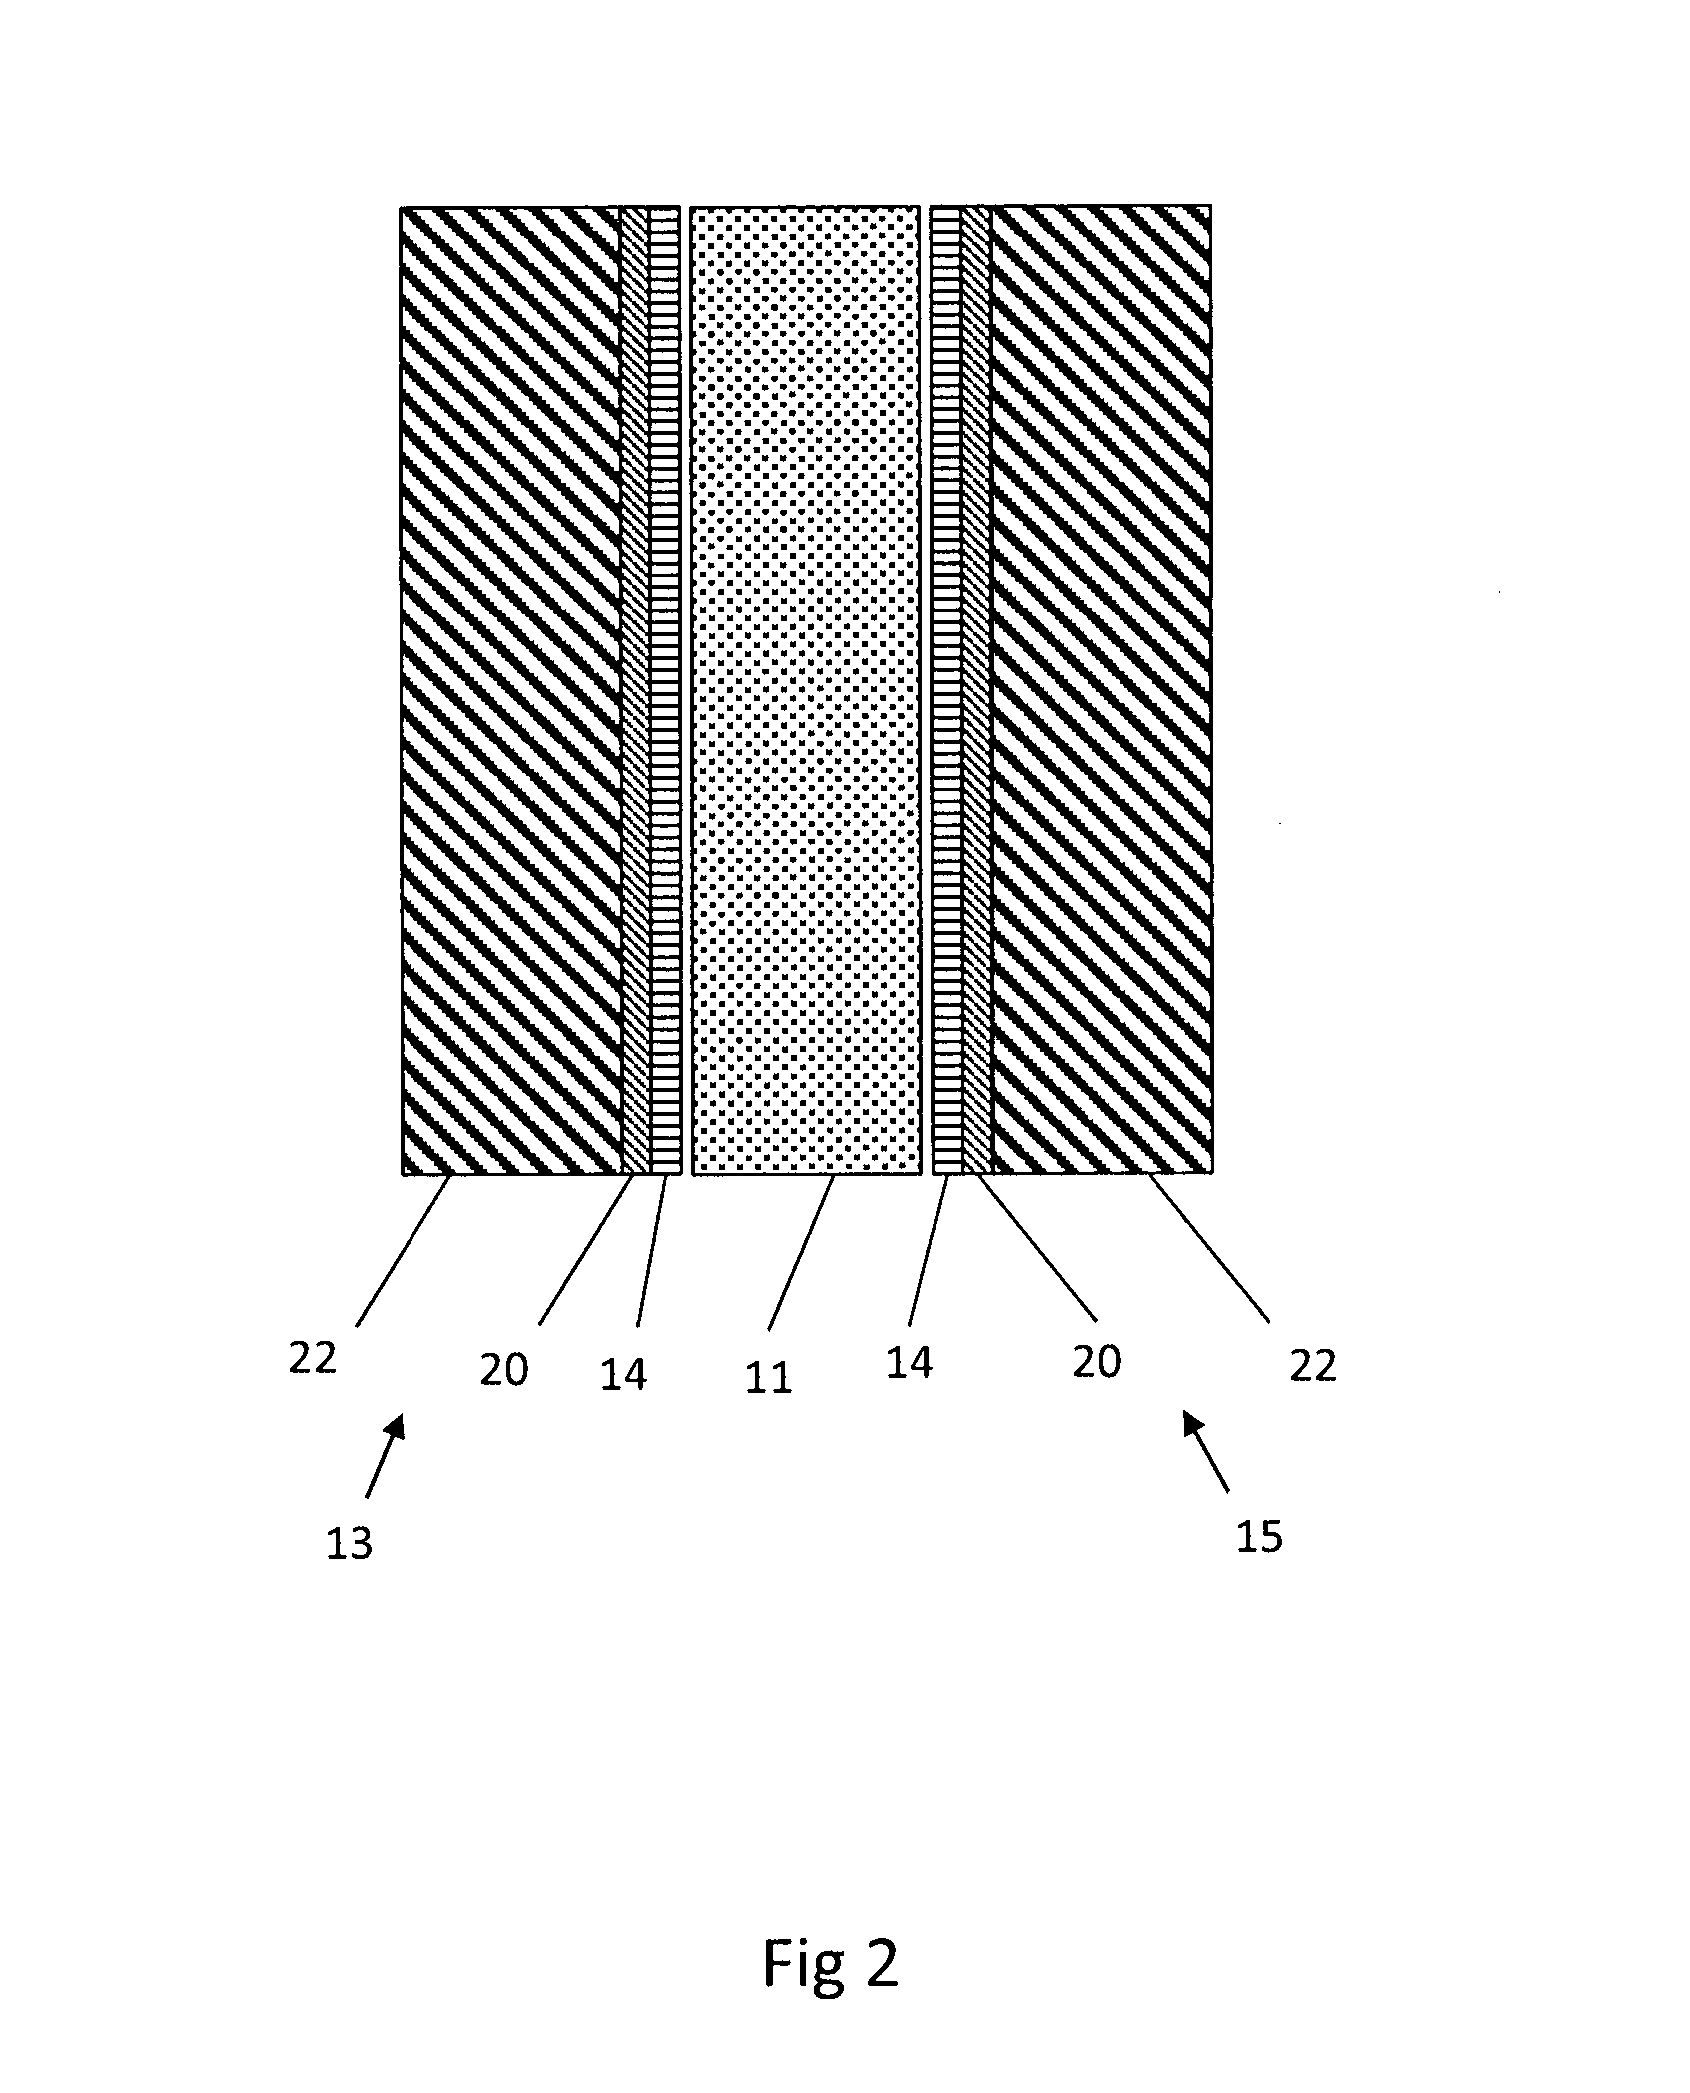 Water purification device